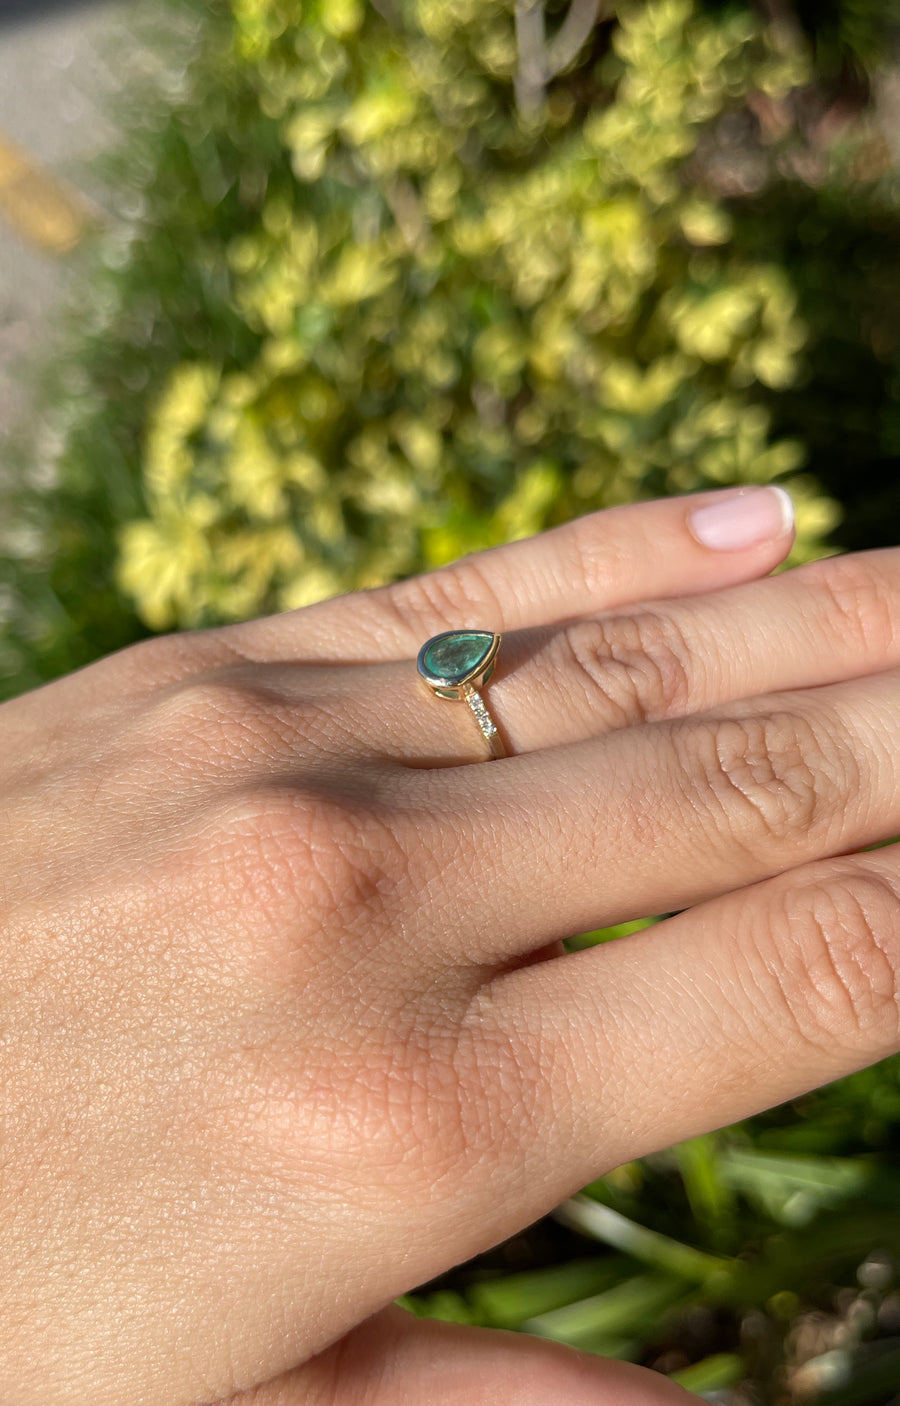 Chic and Sophisticated: Bezel Set 1.06tcw Colombian Emerald Pear & Diamond Ring in 14K Gold